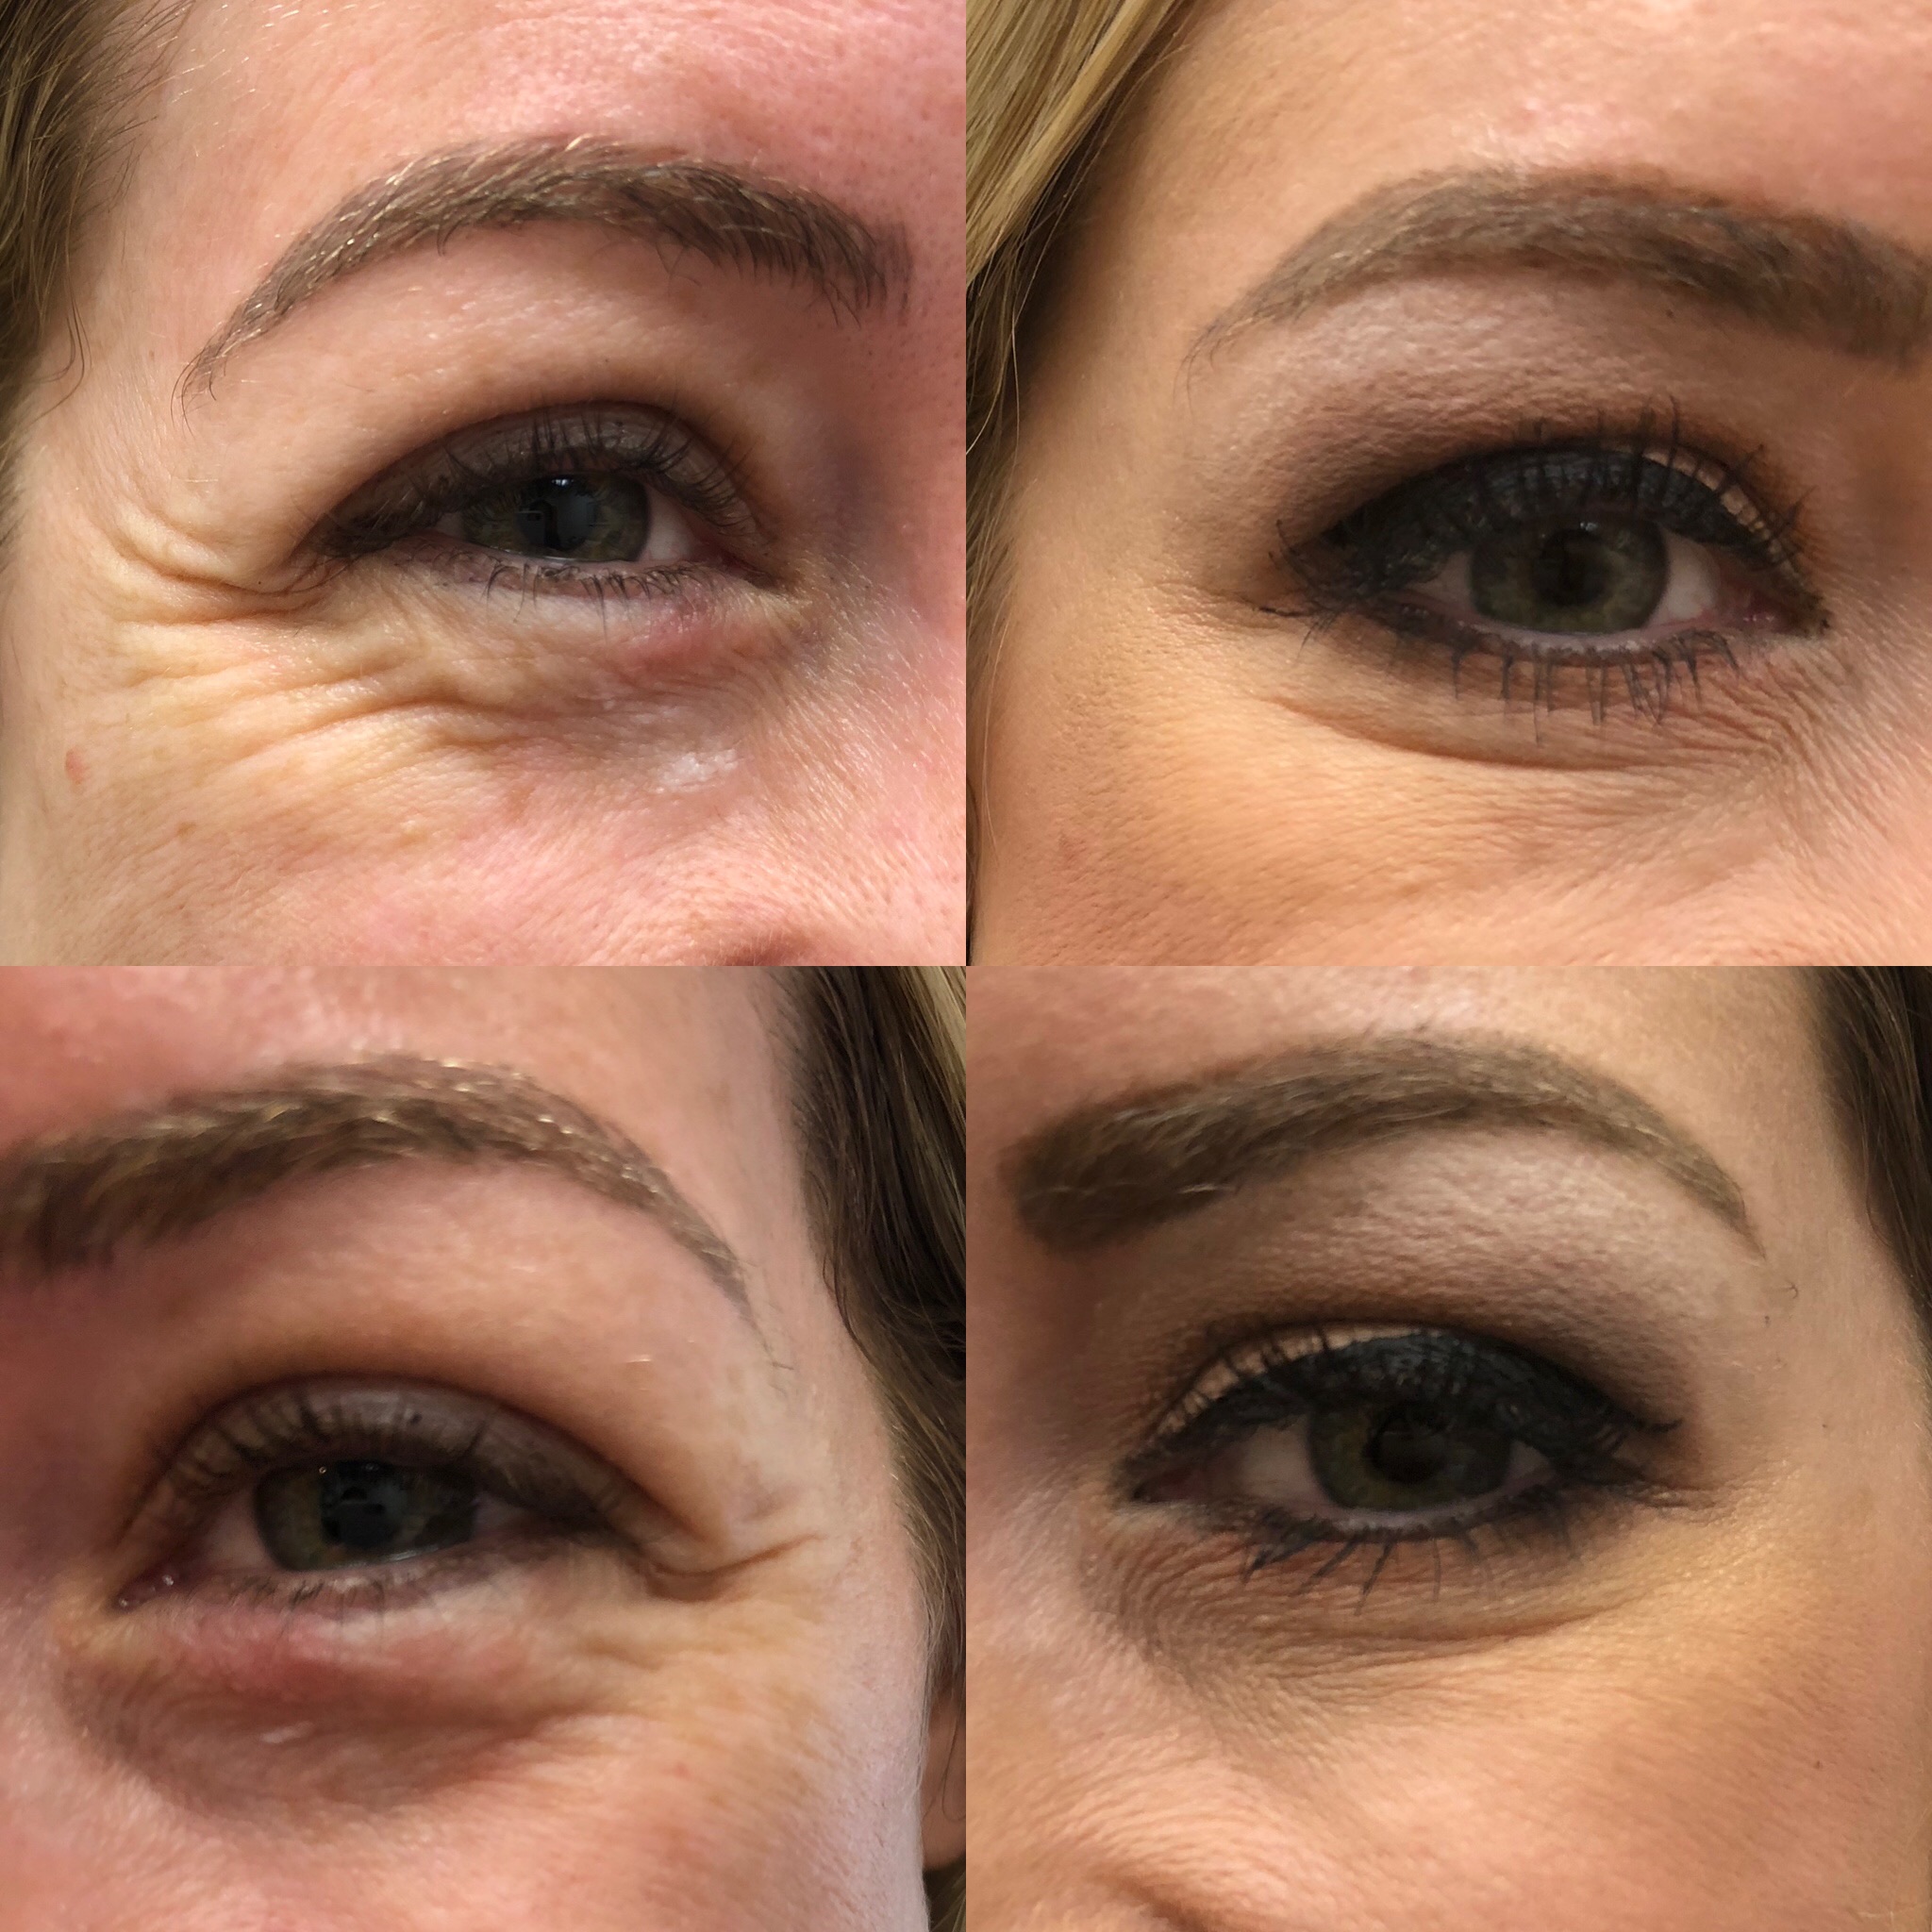 Before and After Botox Jelly Roll Treatment | Beauty Boost Med Spa in Newport Beach, CA